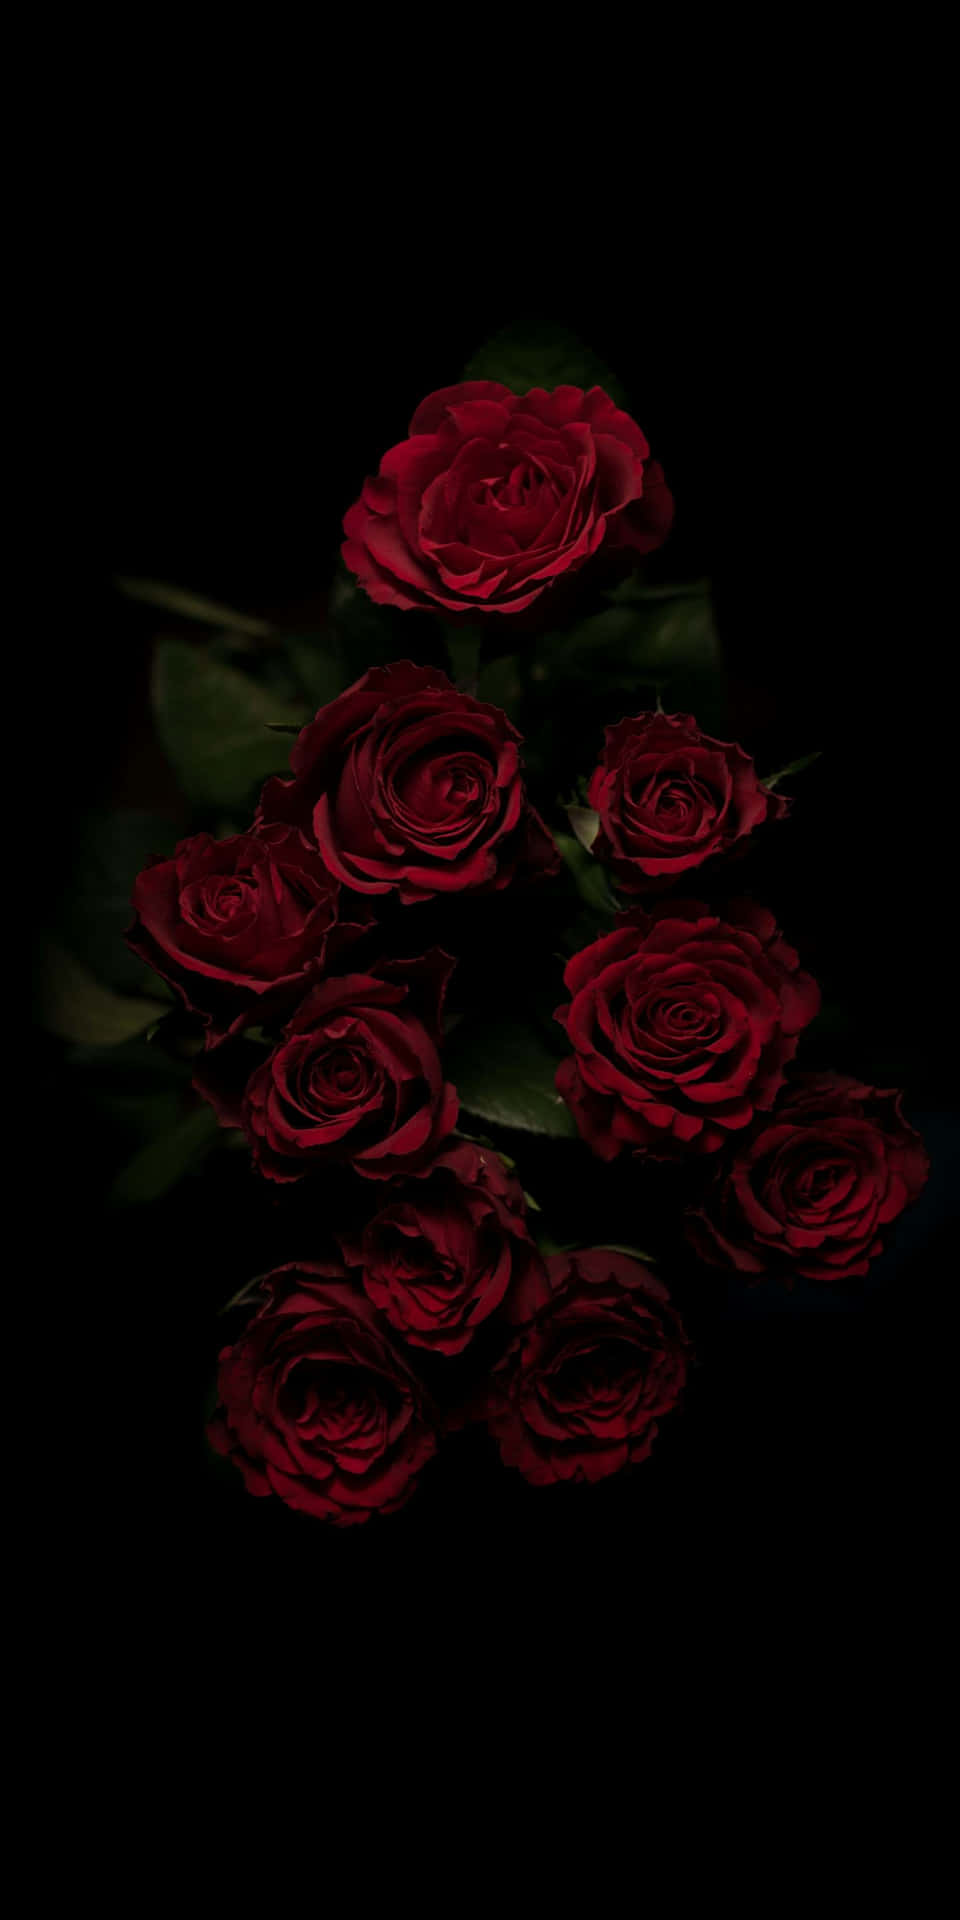 A Vibrant And Fragrant Red Rose For Your Aesthetic Pleasure. Wallpaper